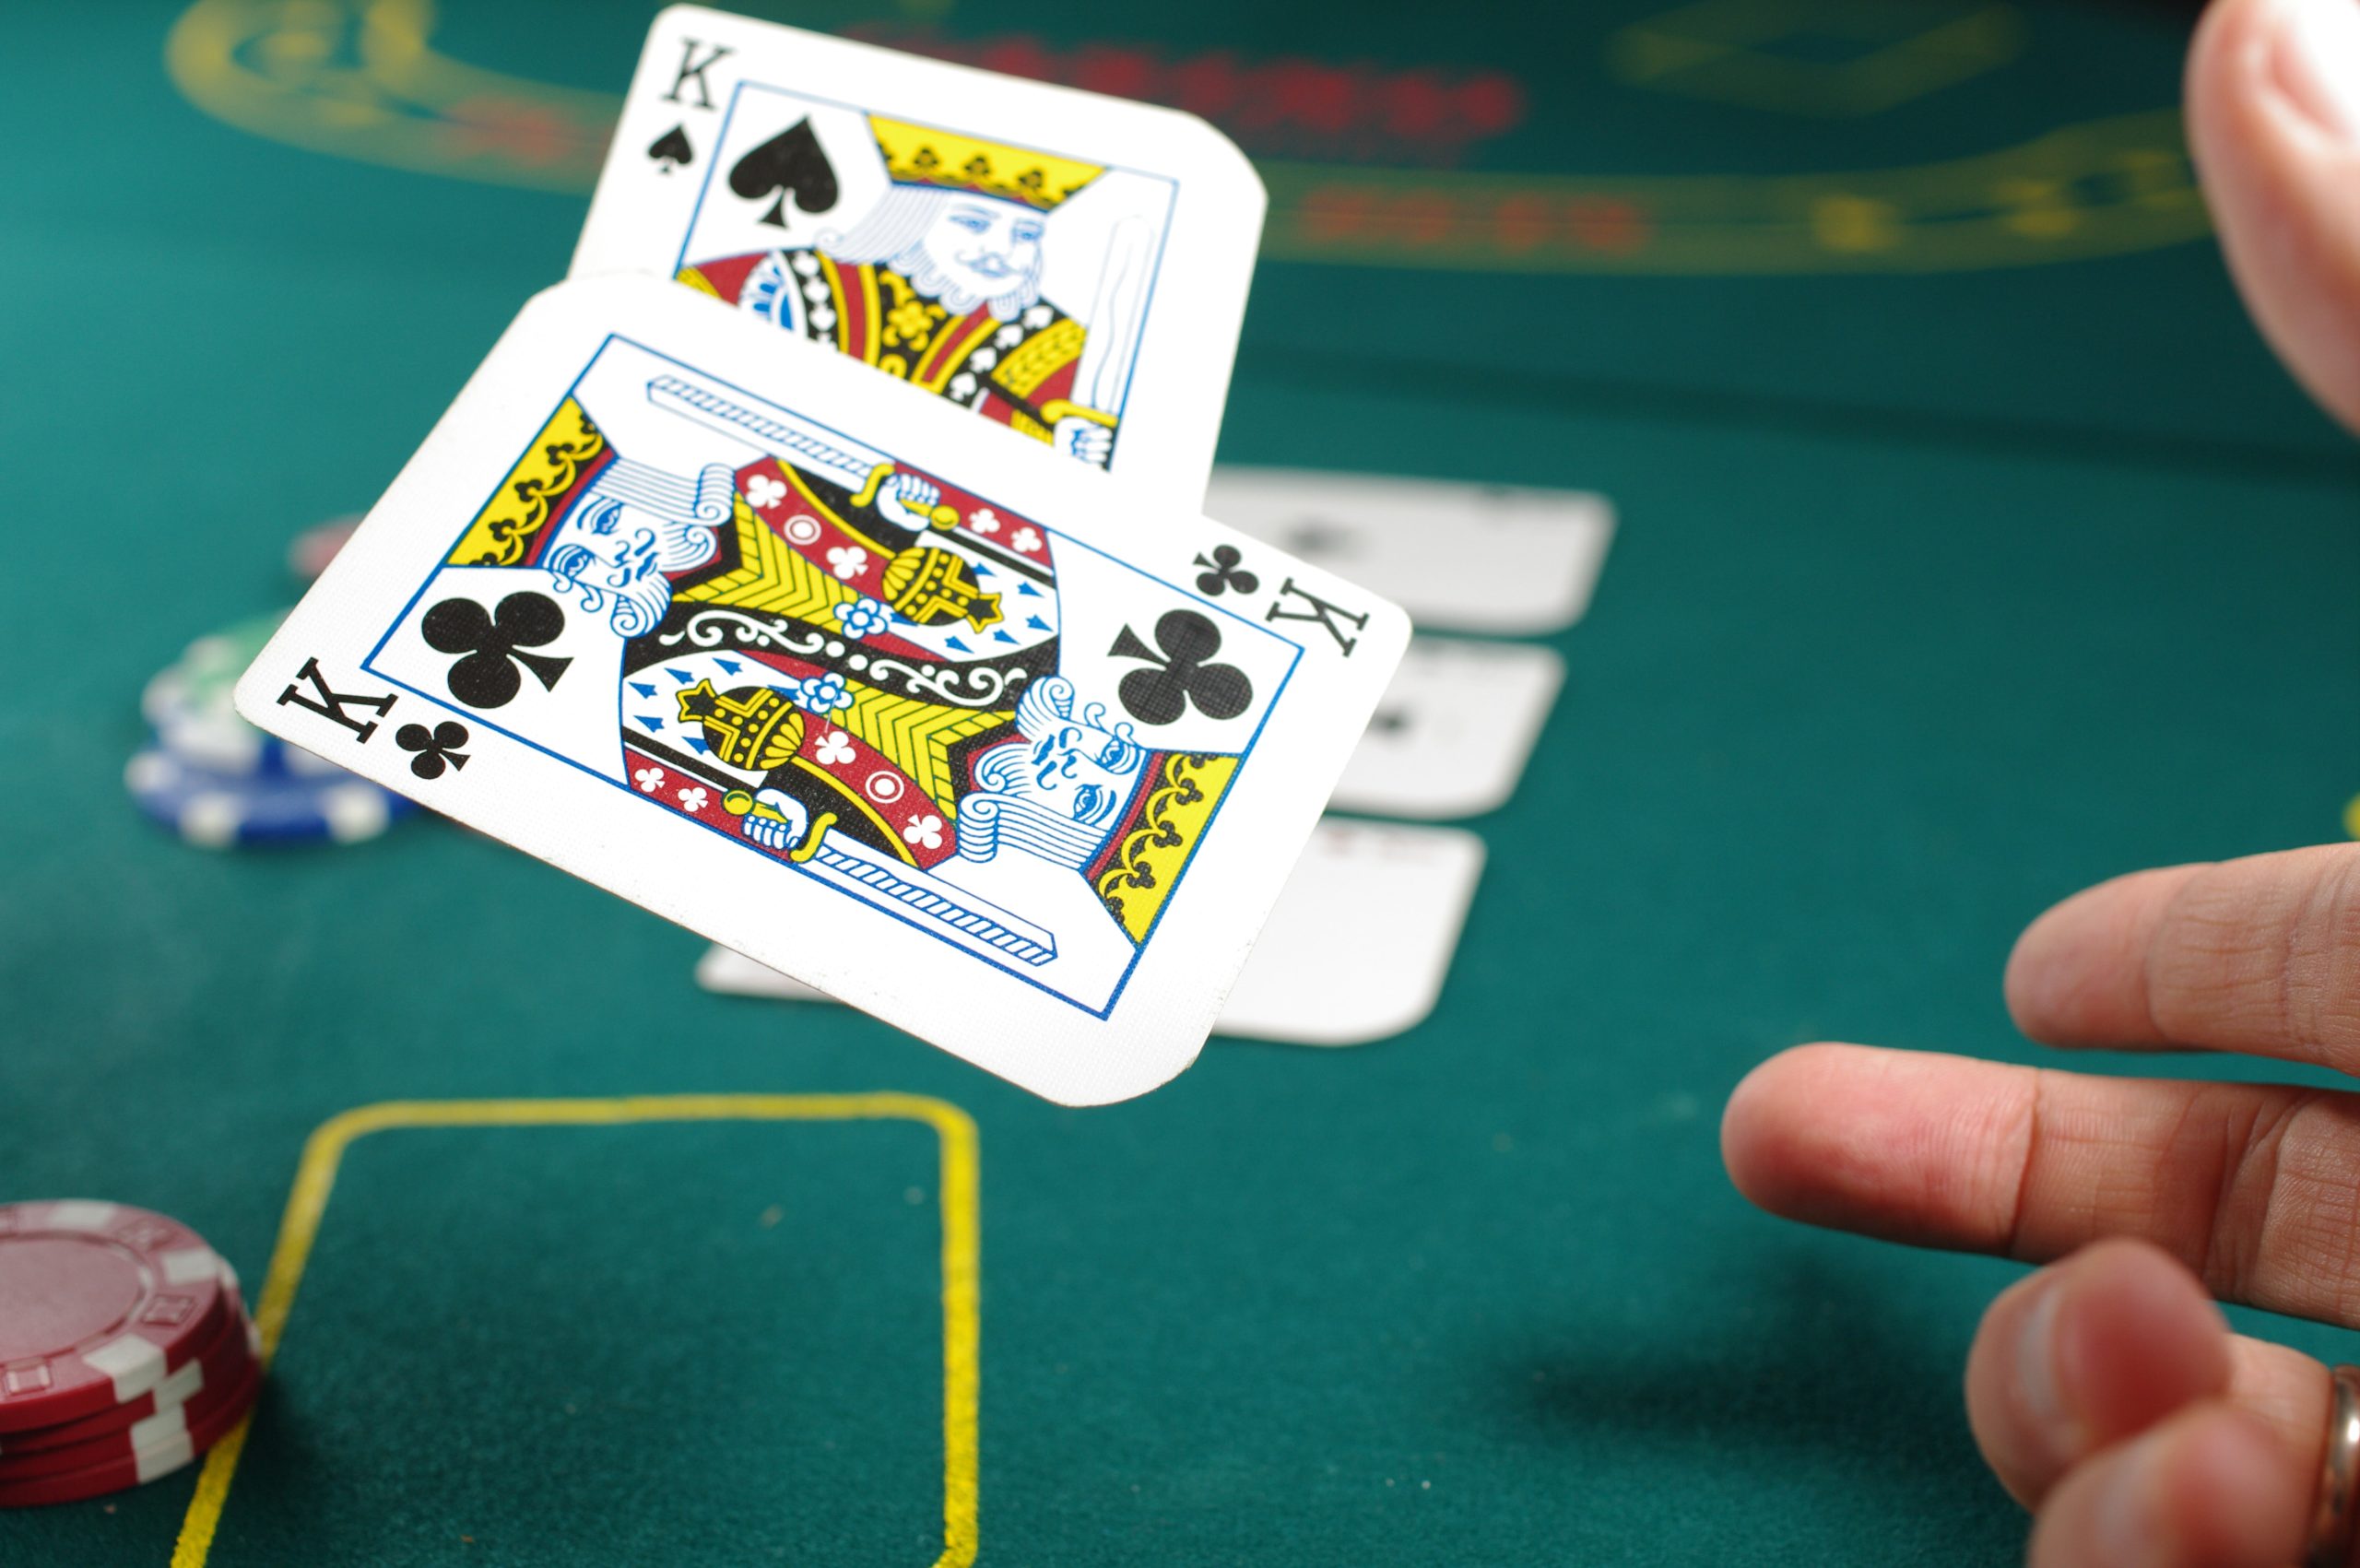 Is gambling with casino cards allowed in Germany?